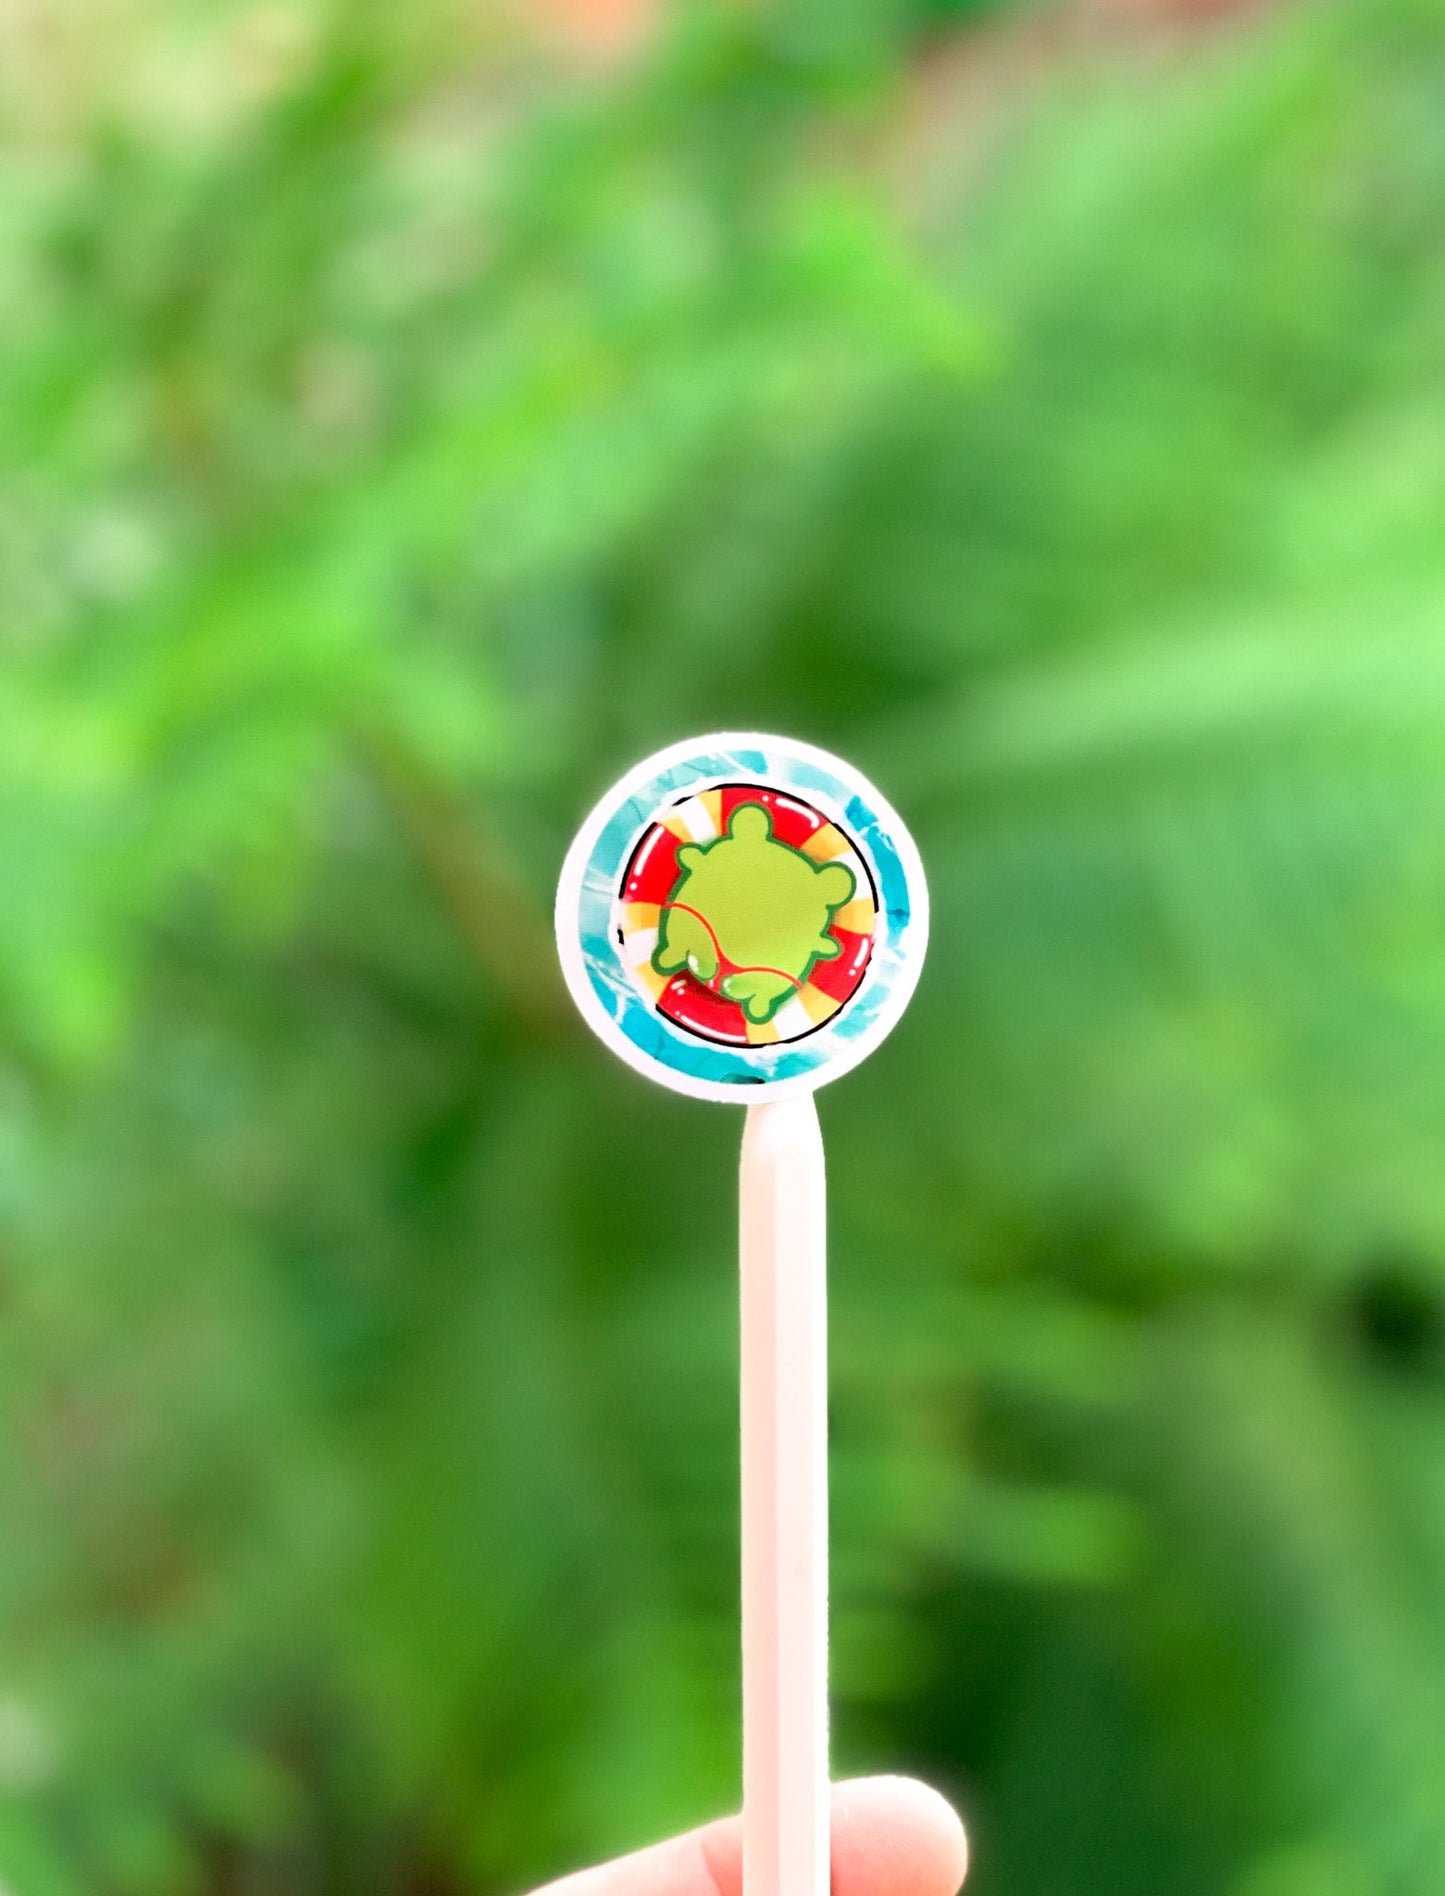 Froggy | Small Stickers - 3D Props Play